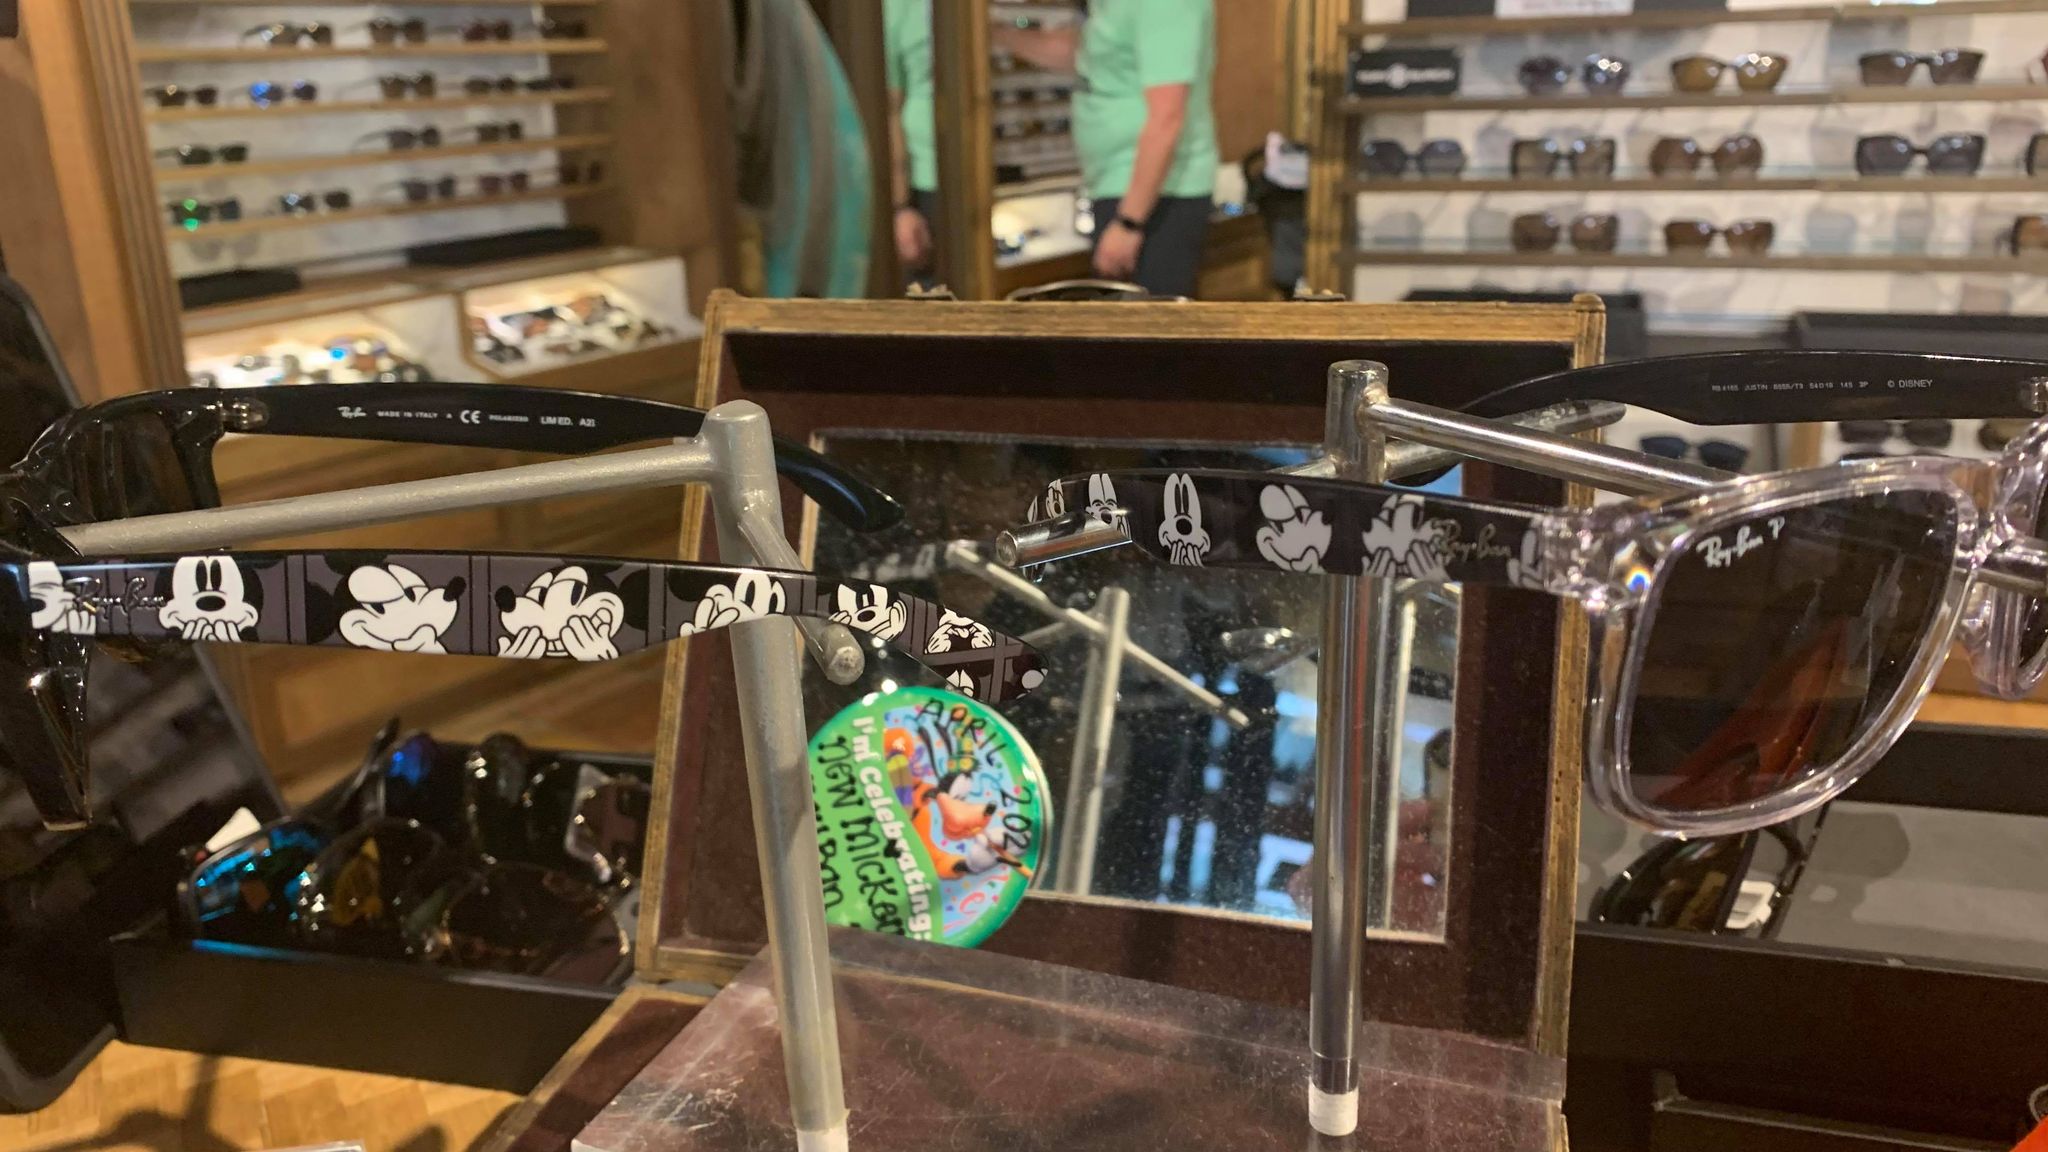 New Mickey Ray-Ban Suglasses Spotted in the Magic Kingdom